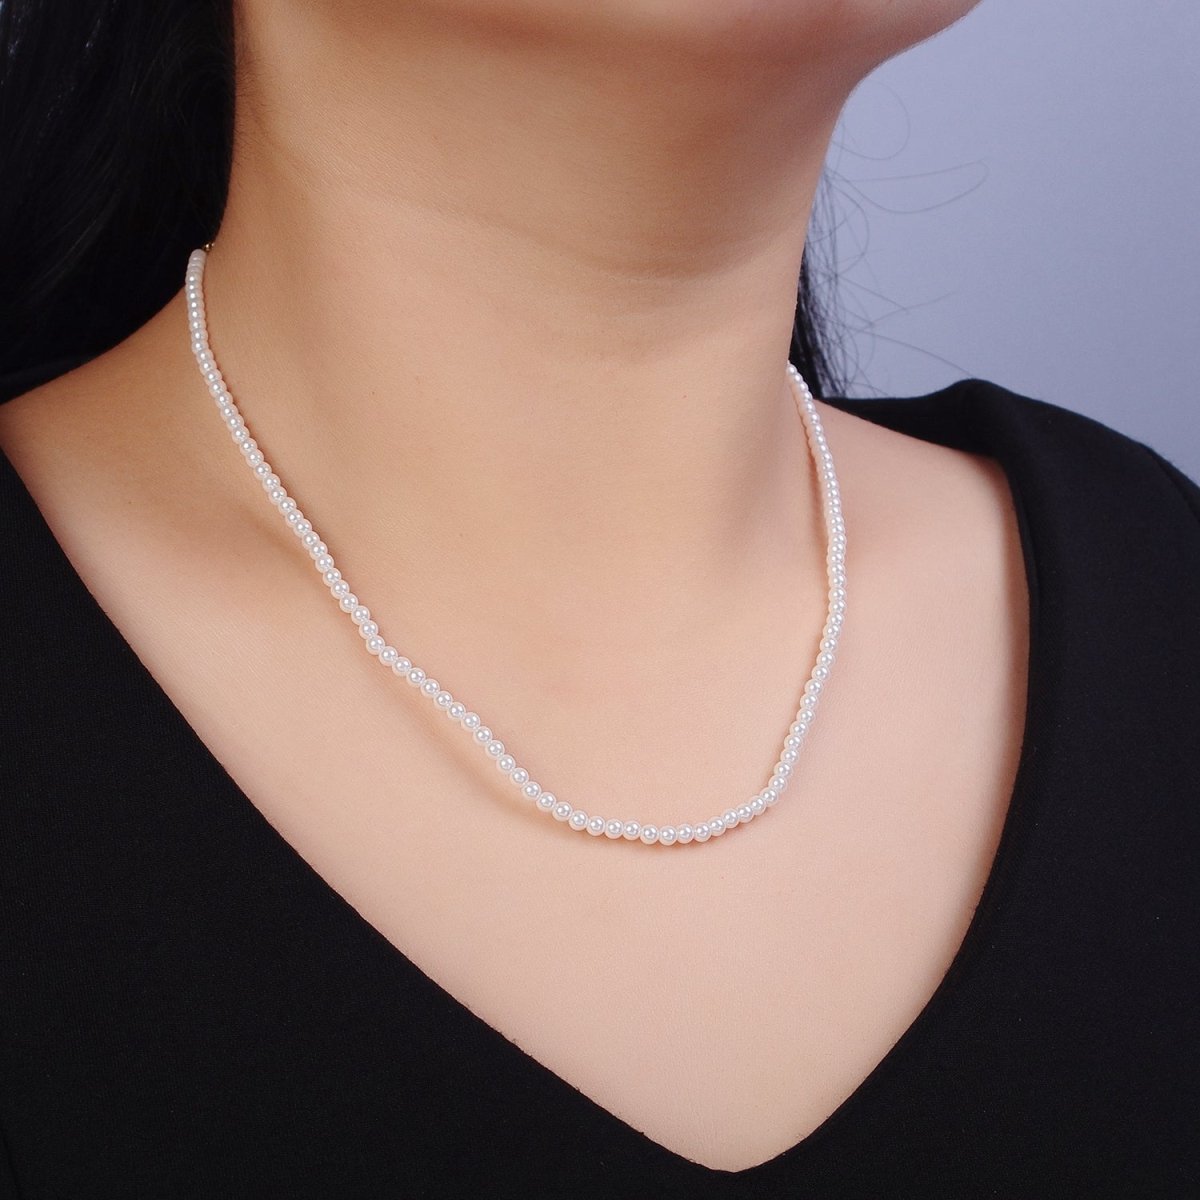 24k Gold Filled Classic Pearl Necklace 16.5 inch Bridal Necklace with Adjustable 2" Extender Chain | WA-1558 Clearance Pricing - DLUXCA